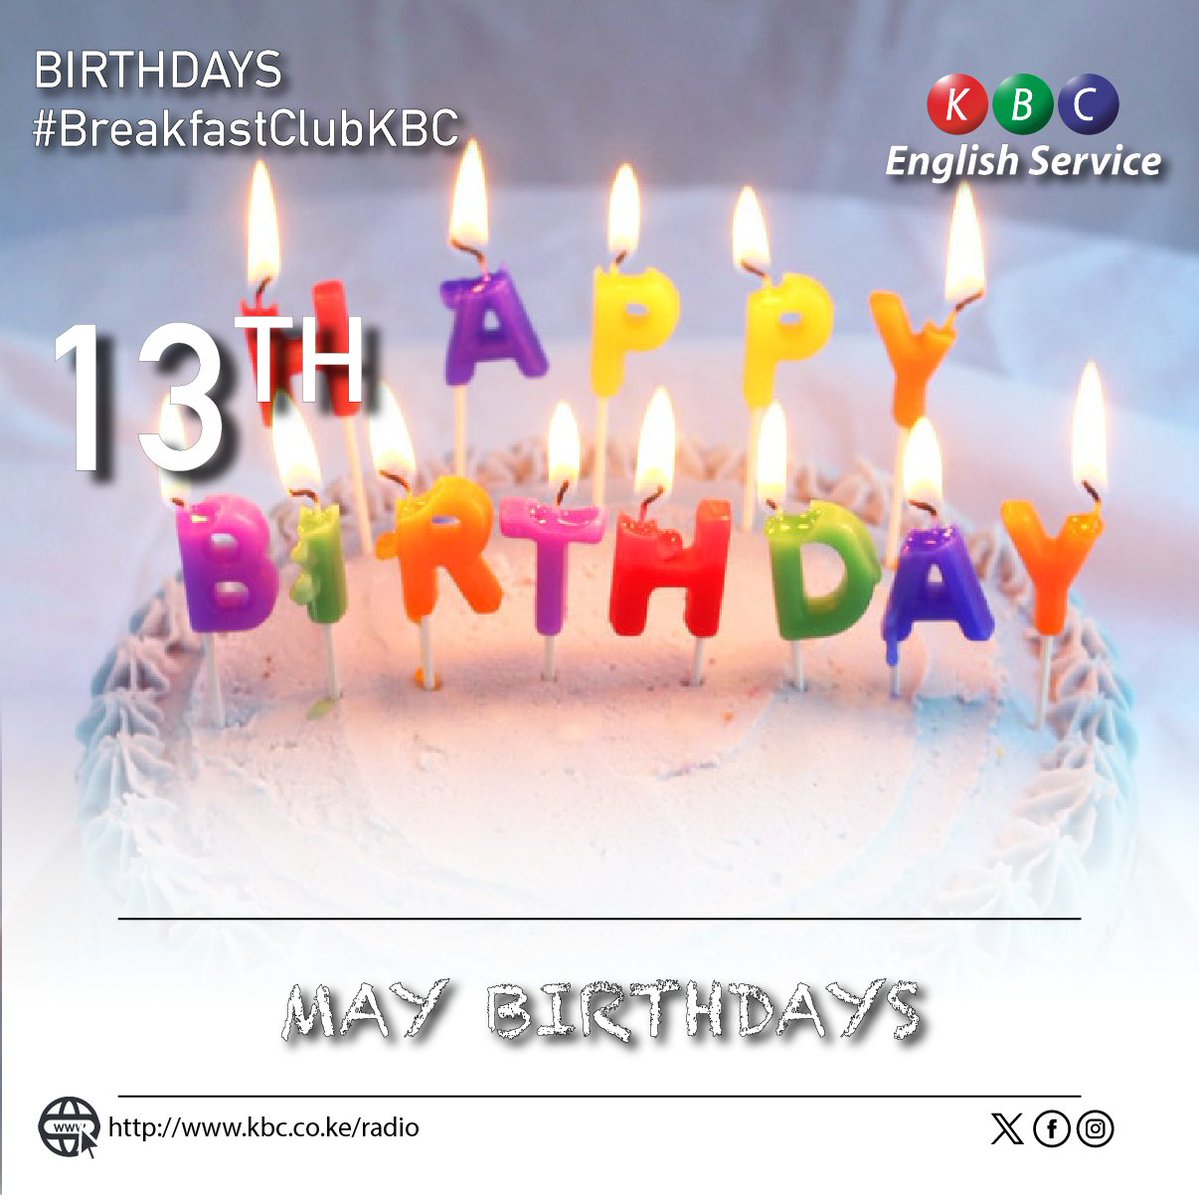 Happy Birthday MAY BABIES! Where are you at? Let us know, we want to send goodies your way this Monday morning 🥳 ^PMN #BreakfastClubKBC